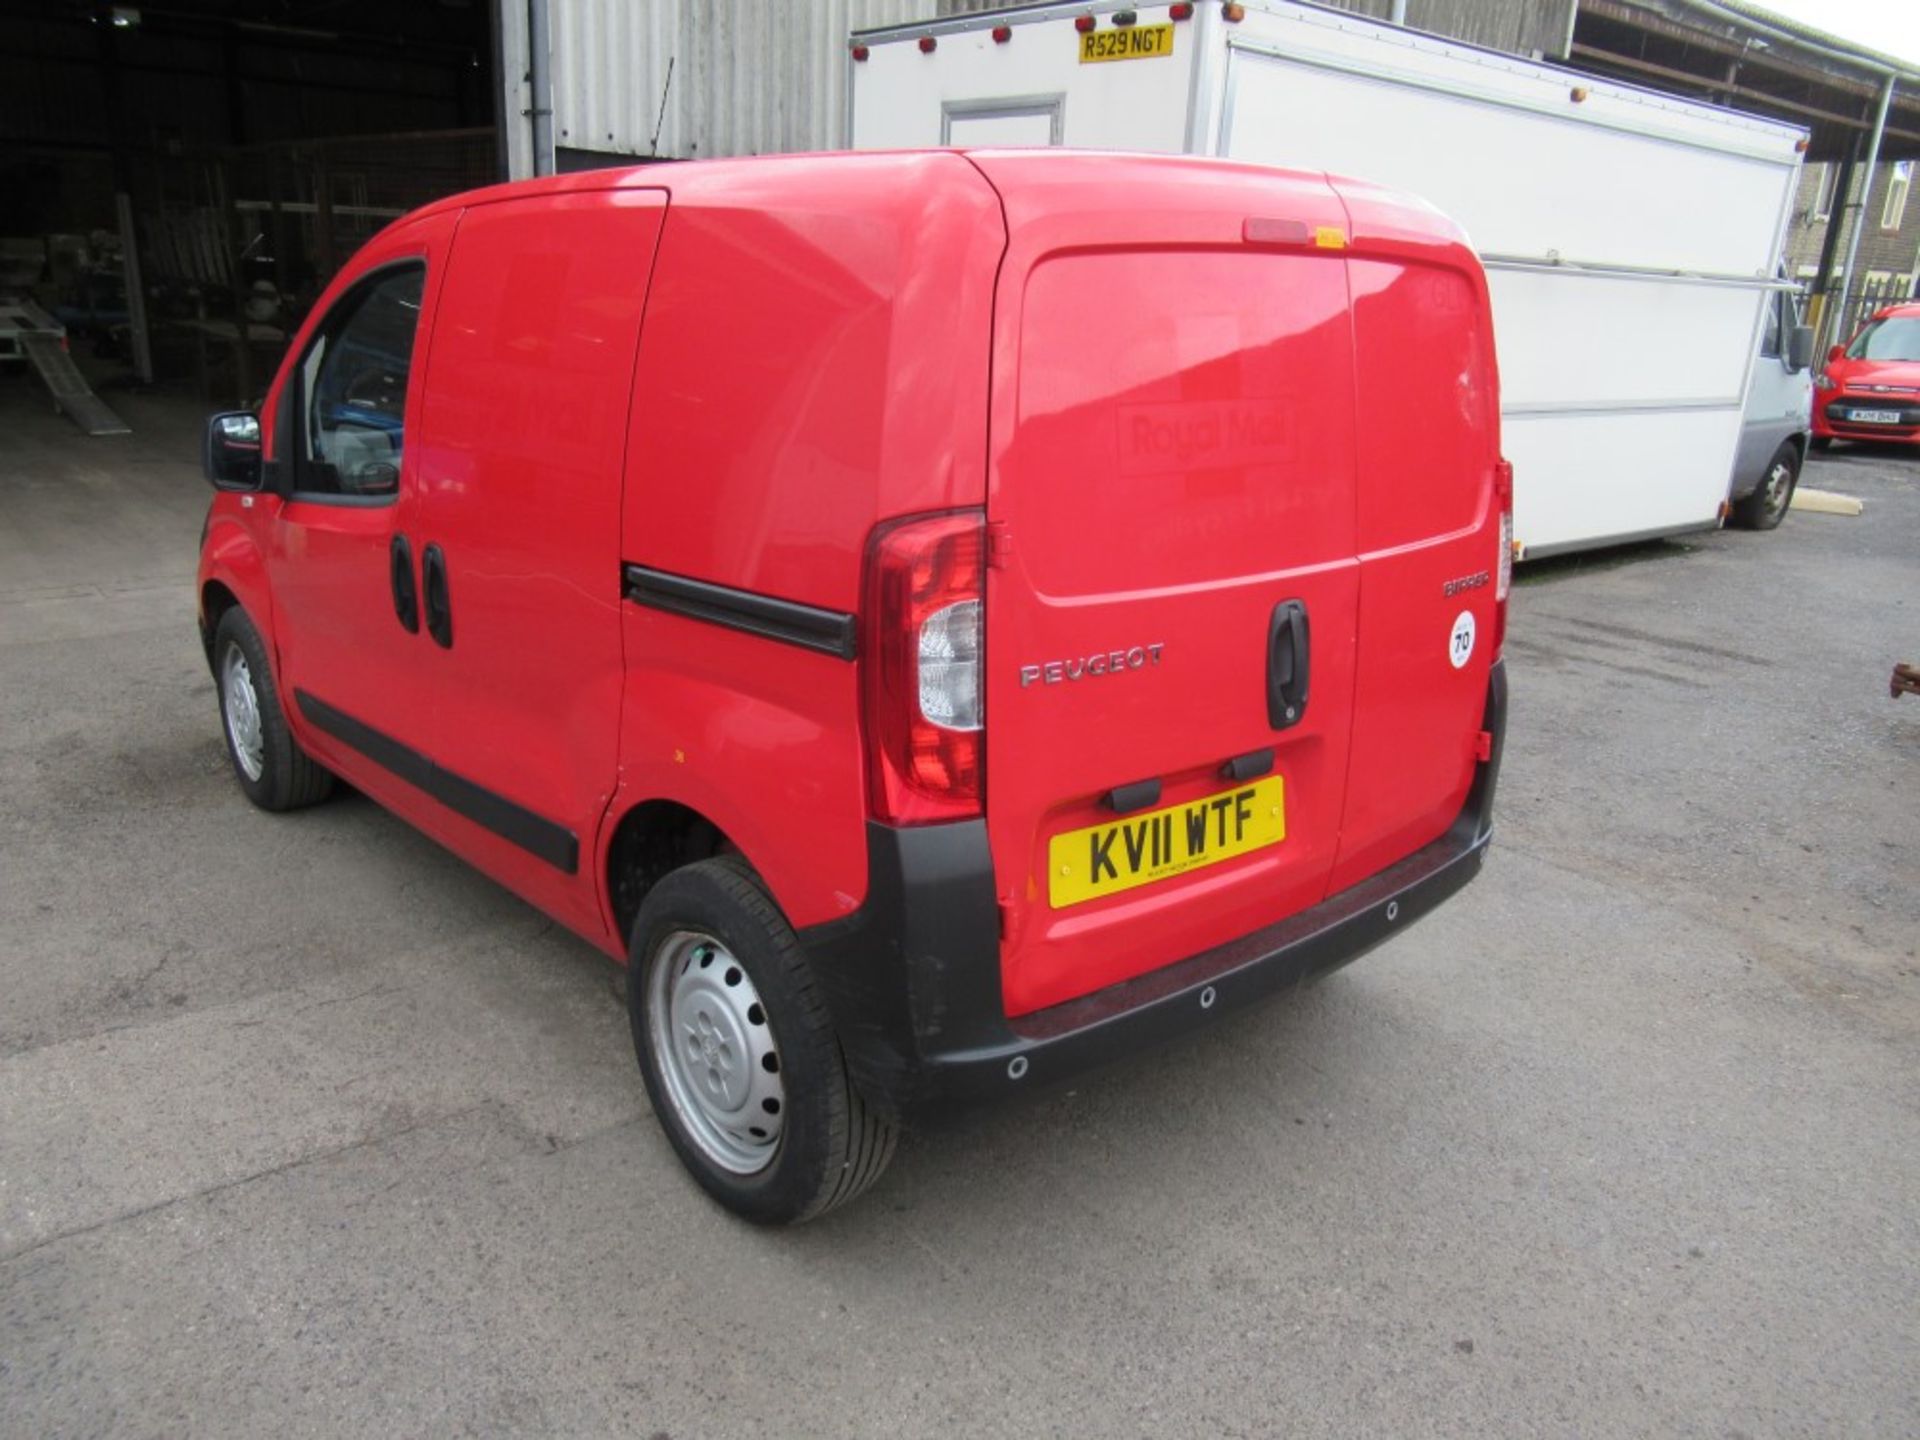 11 reg PEUGEOT BIPPER S HDI, 1ST REG 03/11, TEST 02/20, 54277M WARRANTED, V5 HERE, 1 OWNER FROM - Image 3 of 5